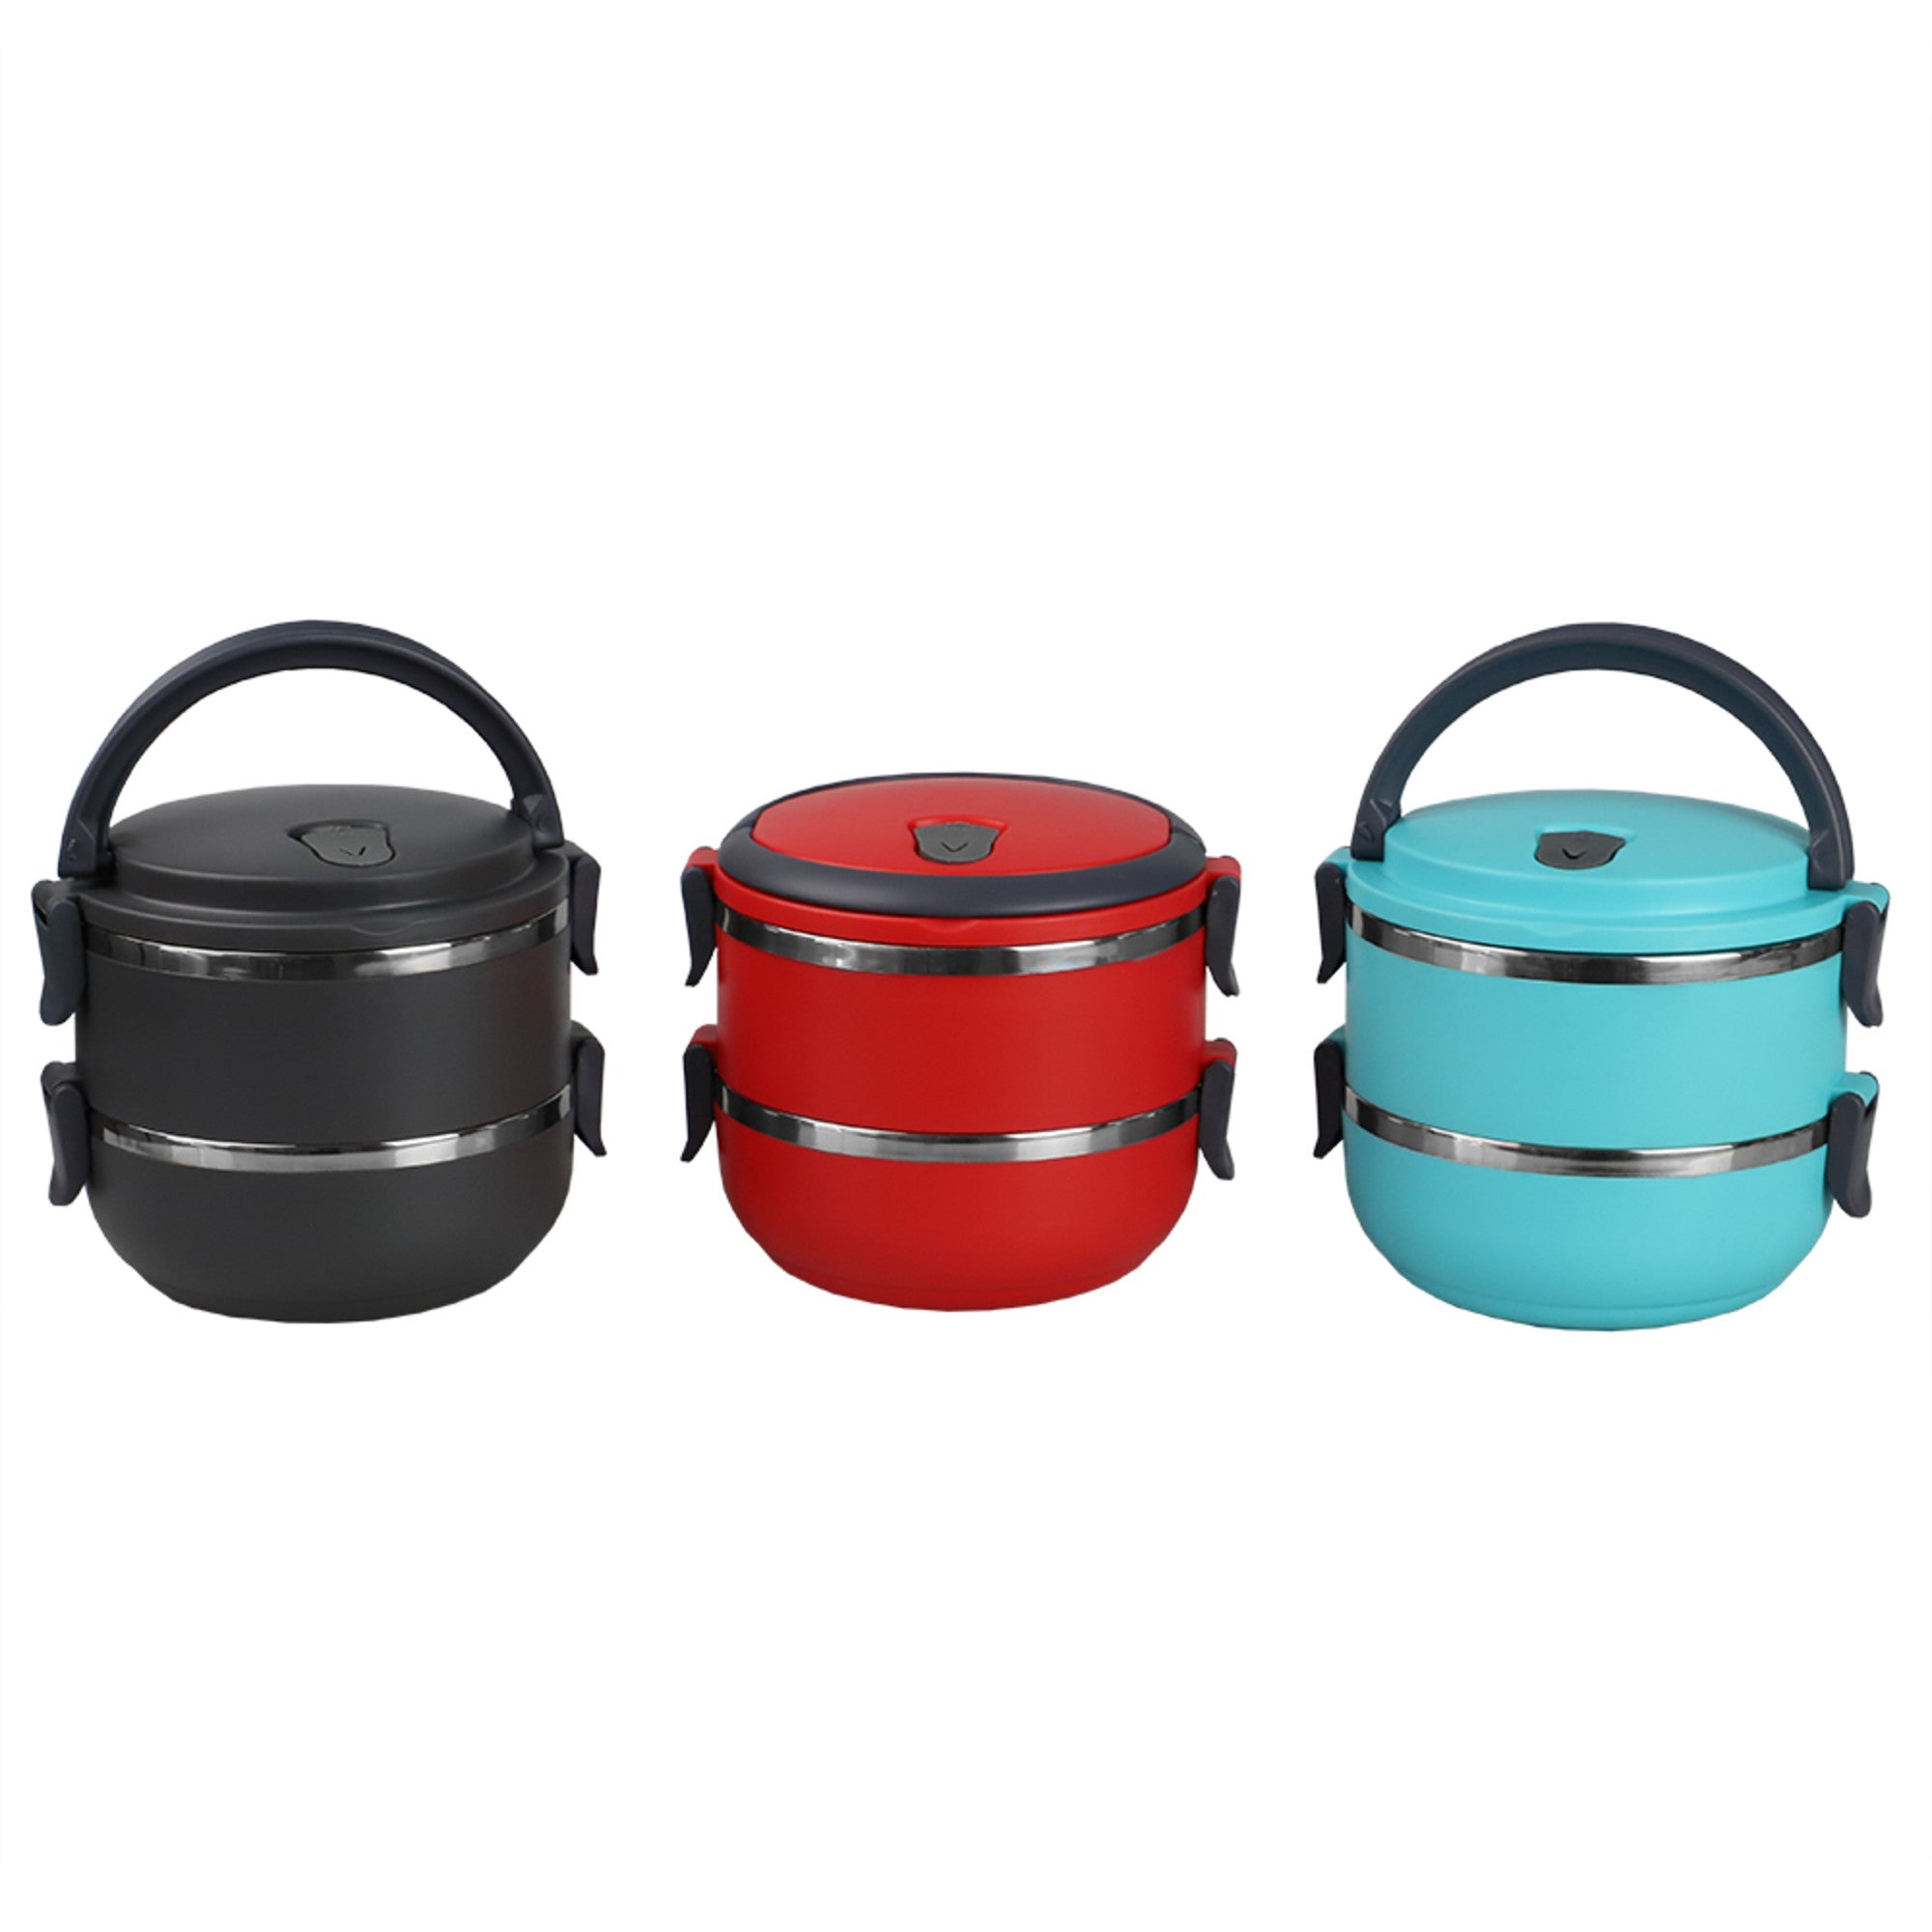 Home Basics 2 Tier Leak-Proof Lunch Box - Assorted Colors